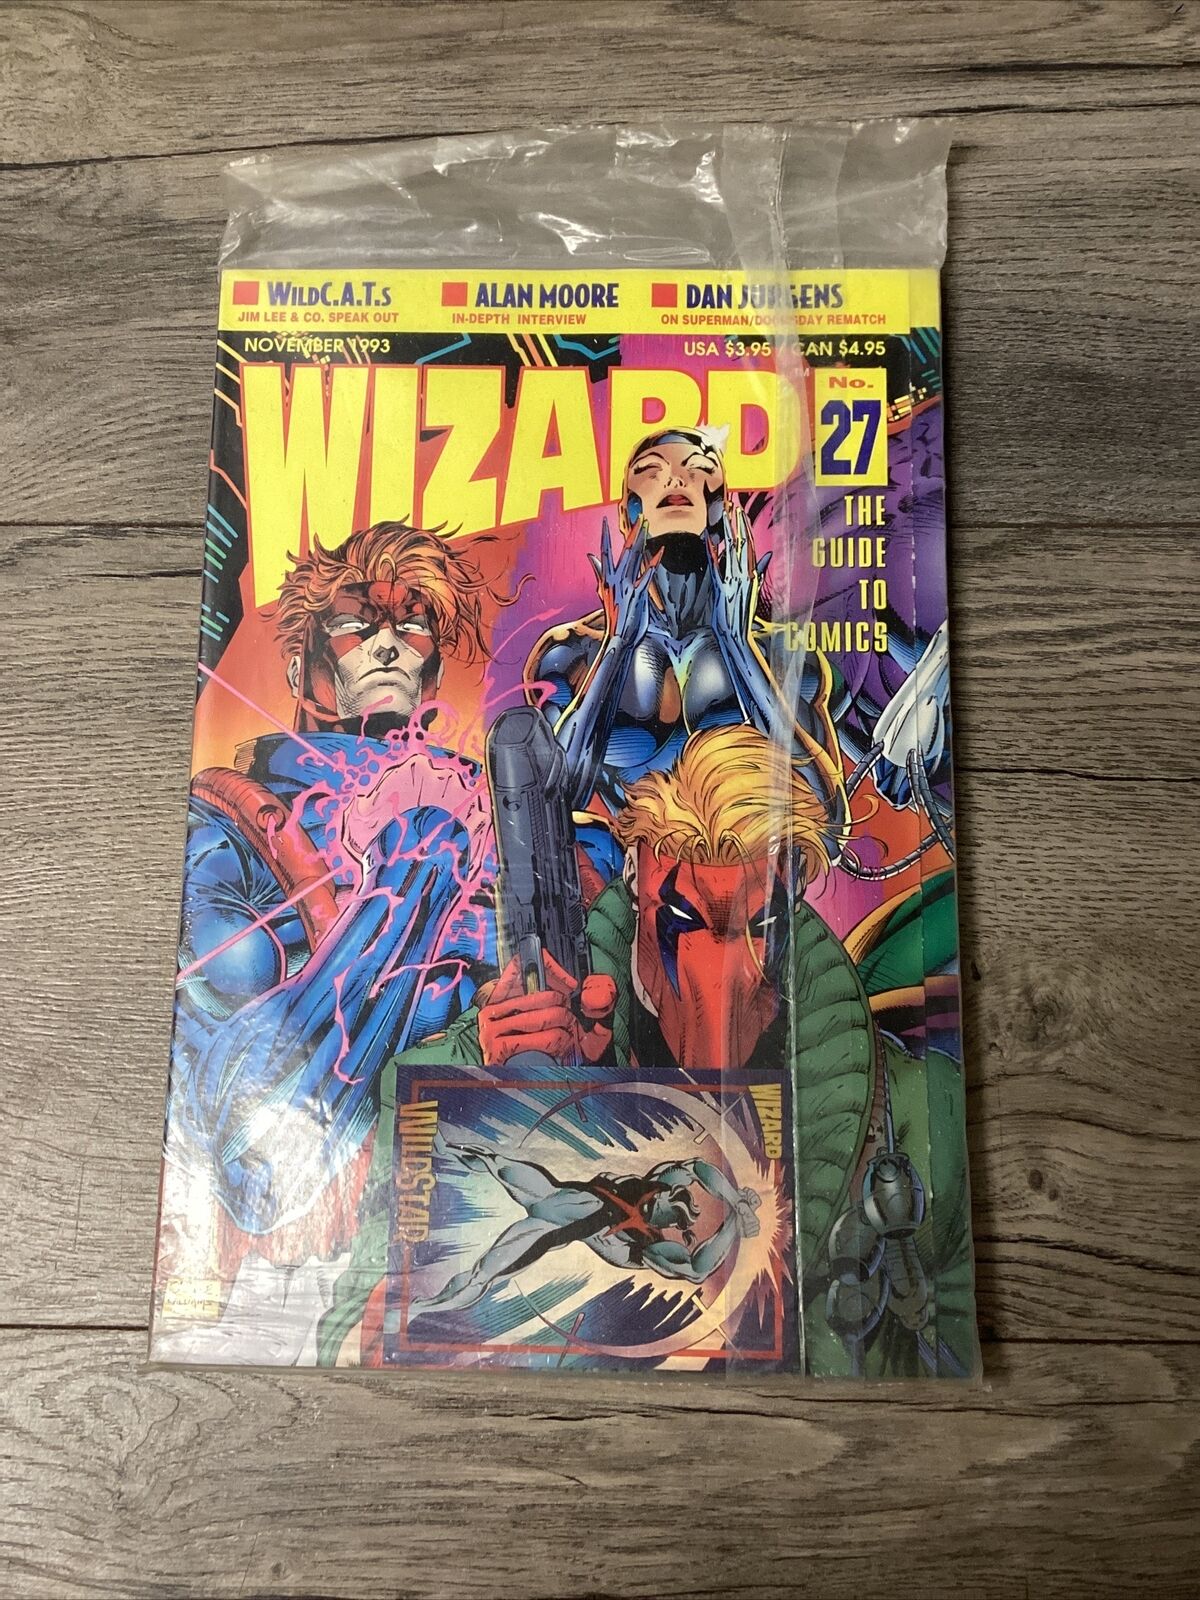 WIZARD MAGAZINE THE GUIDE TO COMICS # 27 Factory Sealed (Nov 1993) New